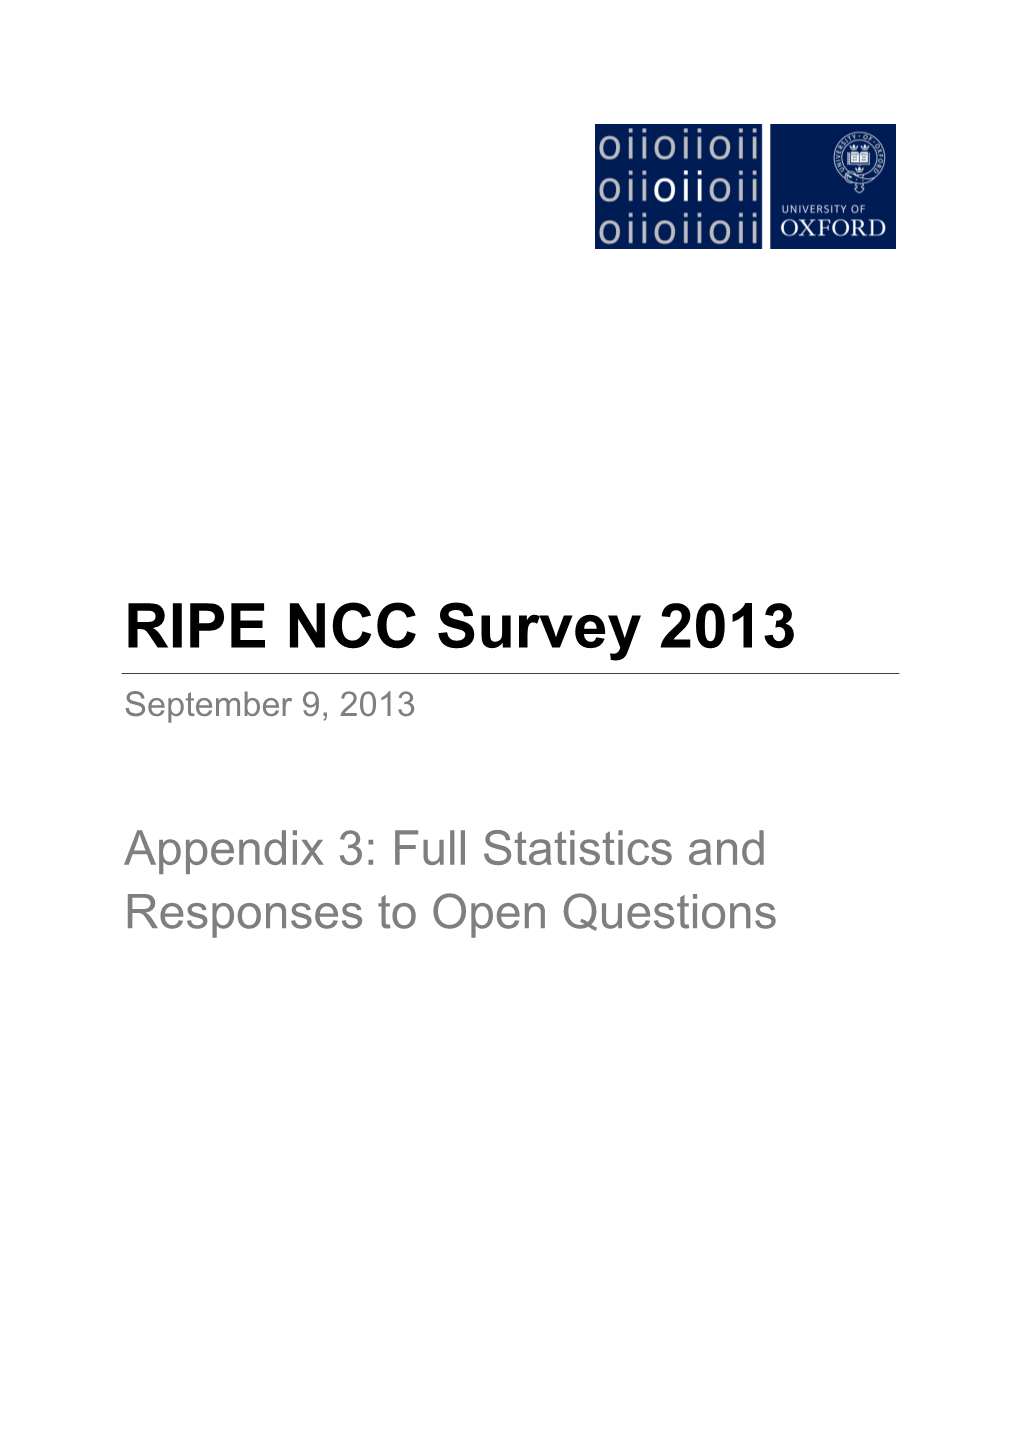 RIPE NCC Survey 2013: Full Statistics and Responses to Open Questions